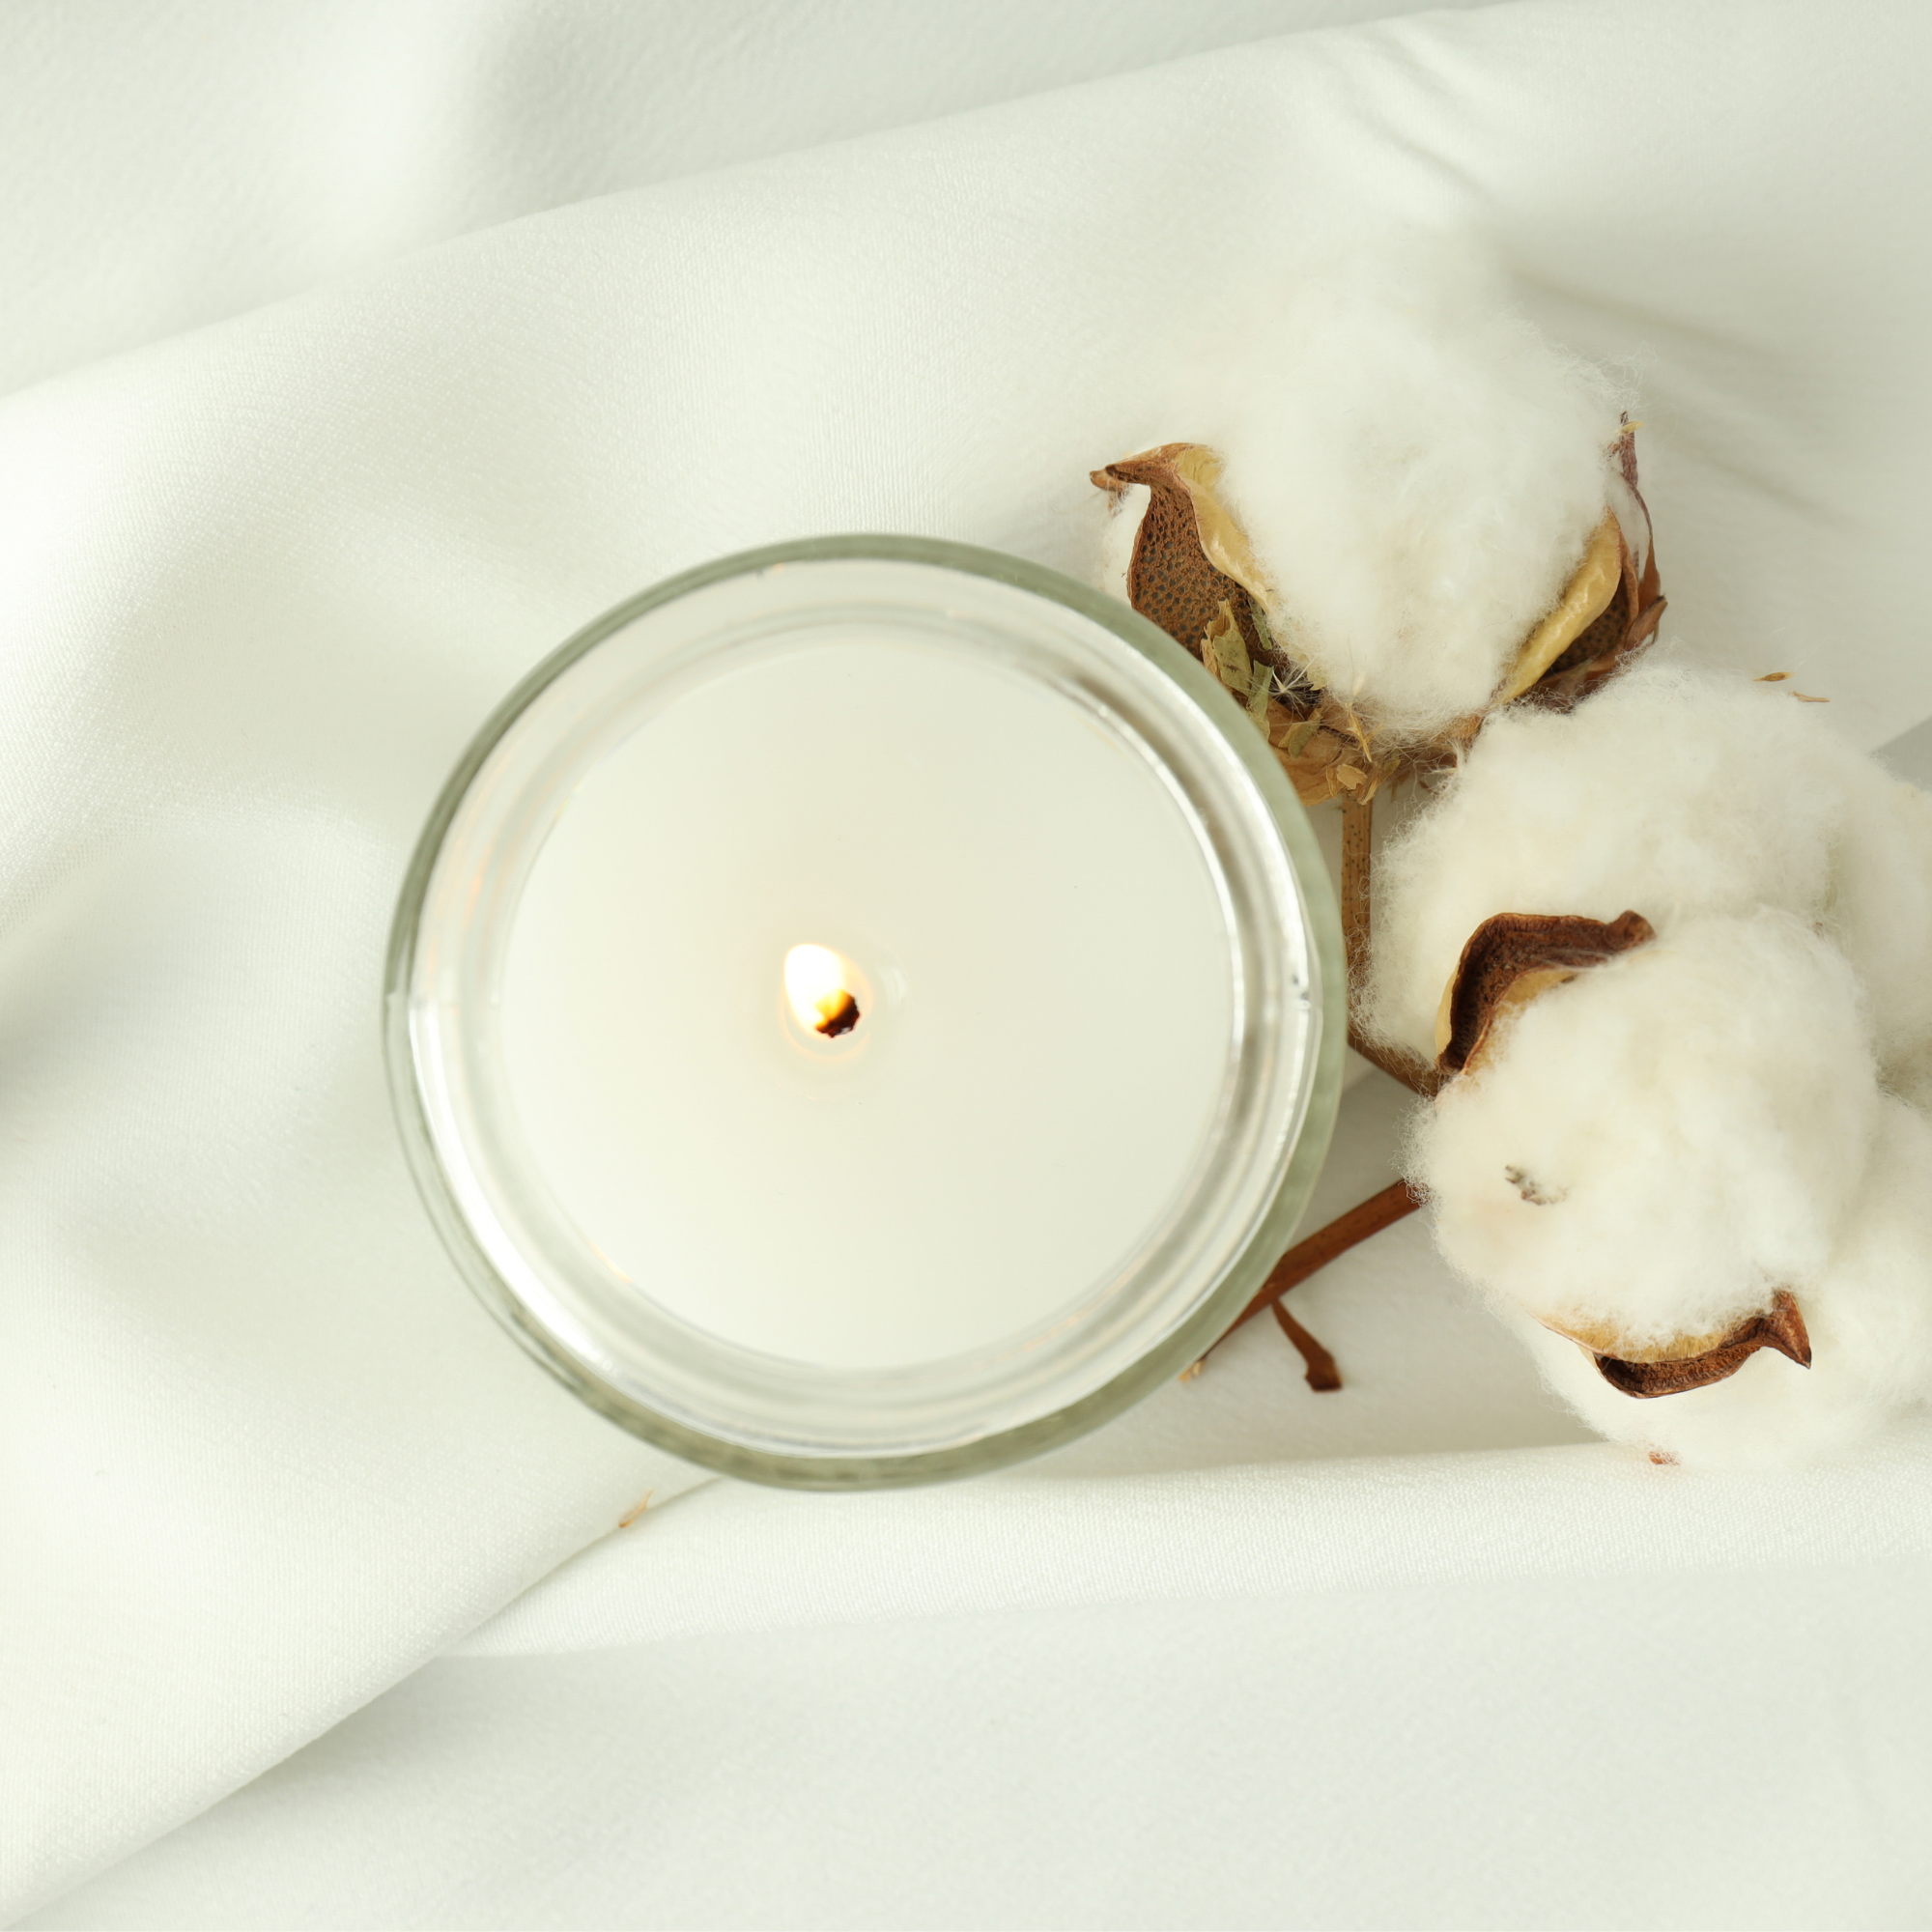 Palo Santo Soy Candle Burning From Top